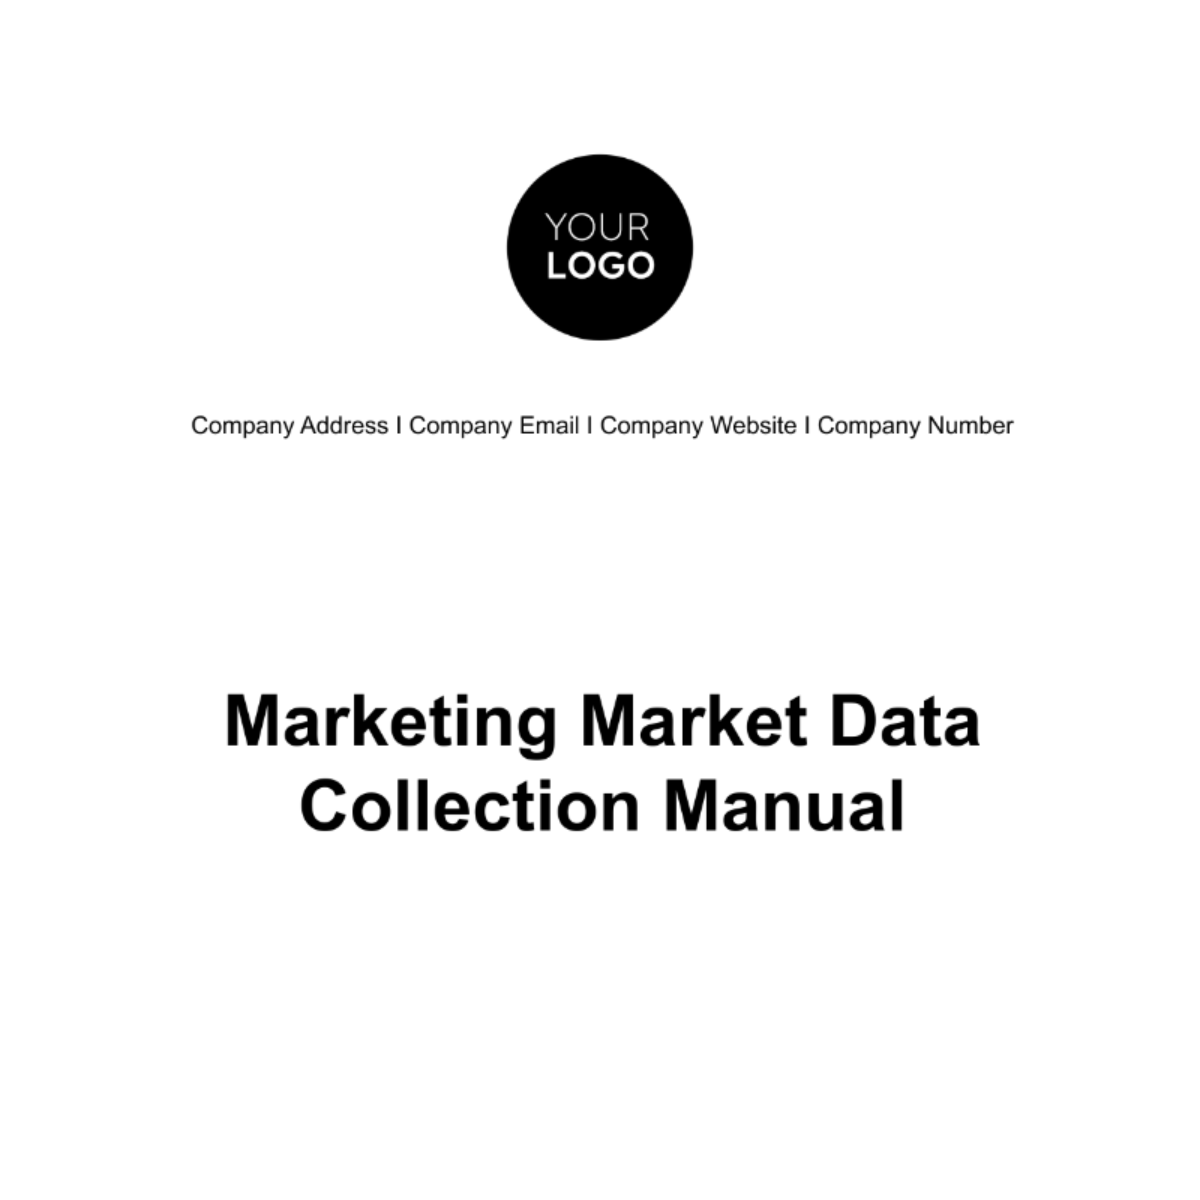 Marketing Market Data Collection Manual Template